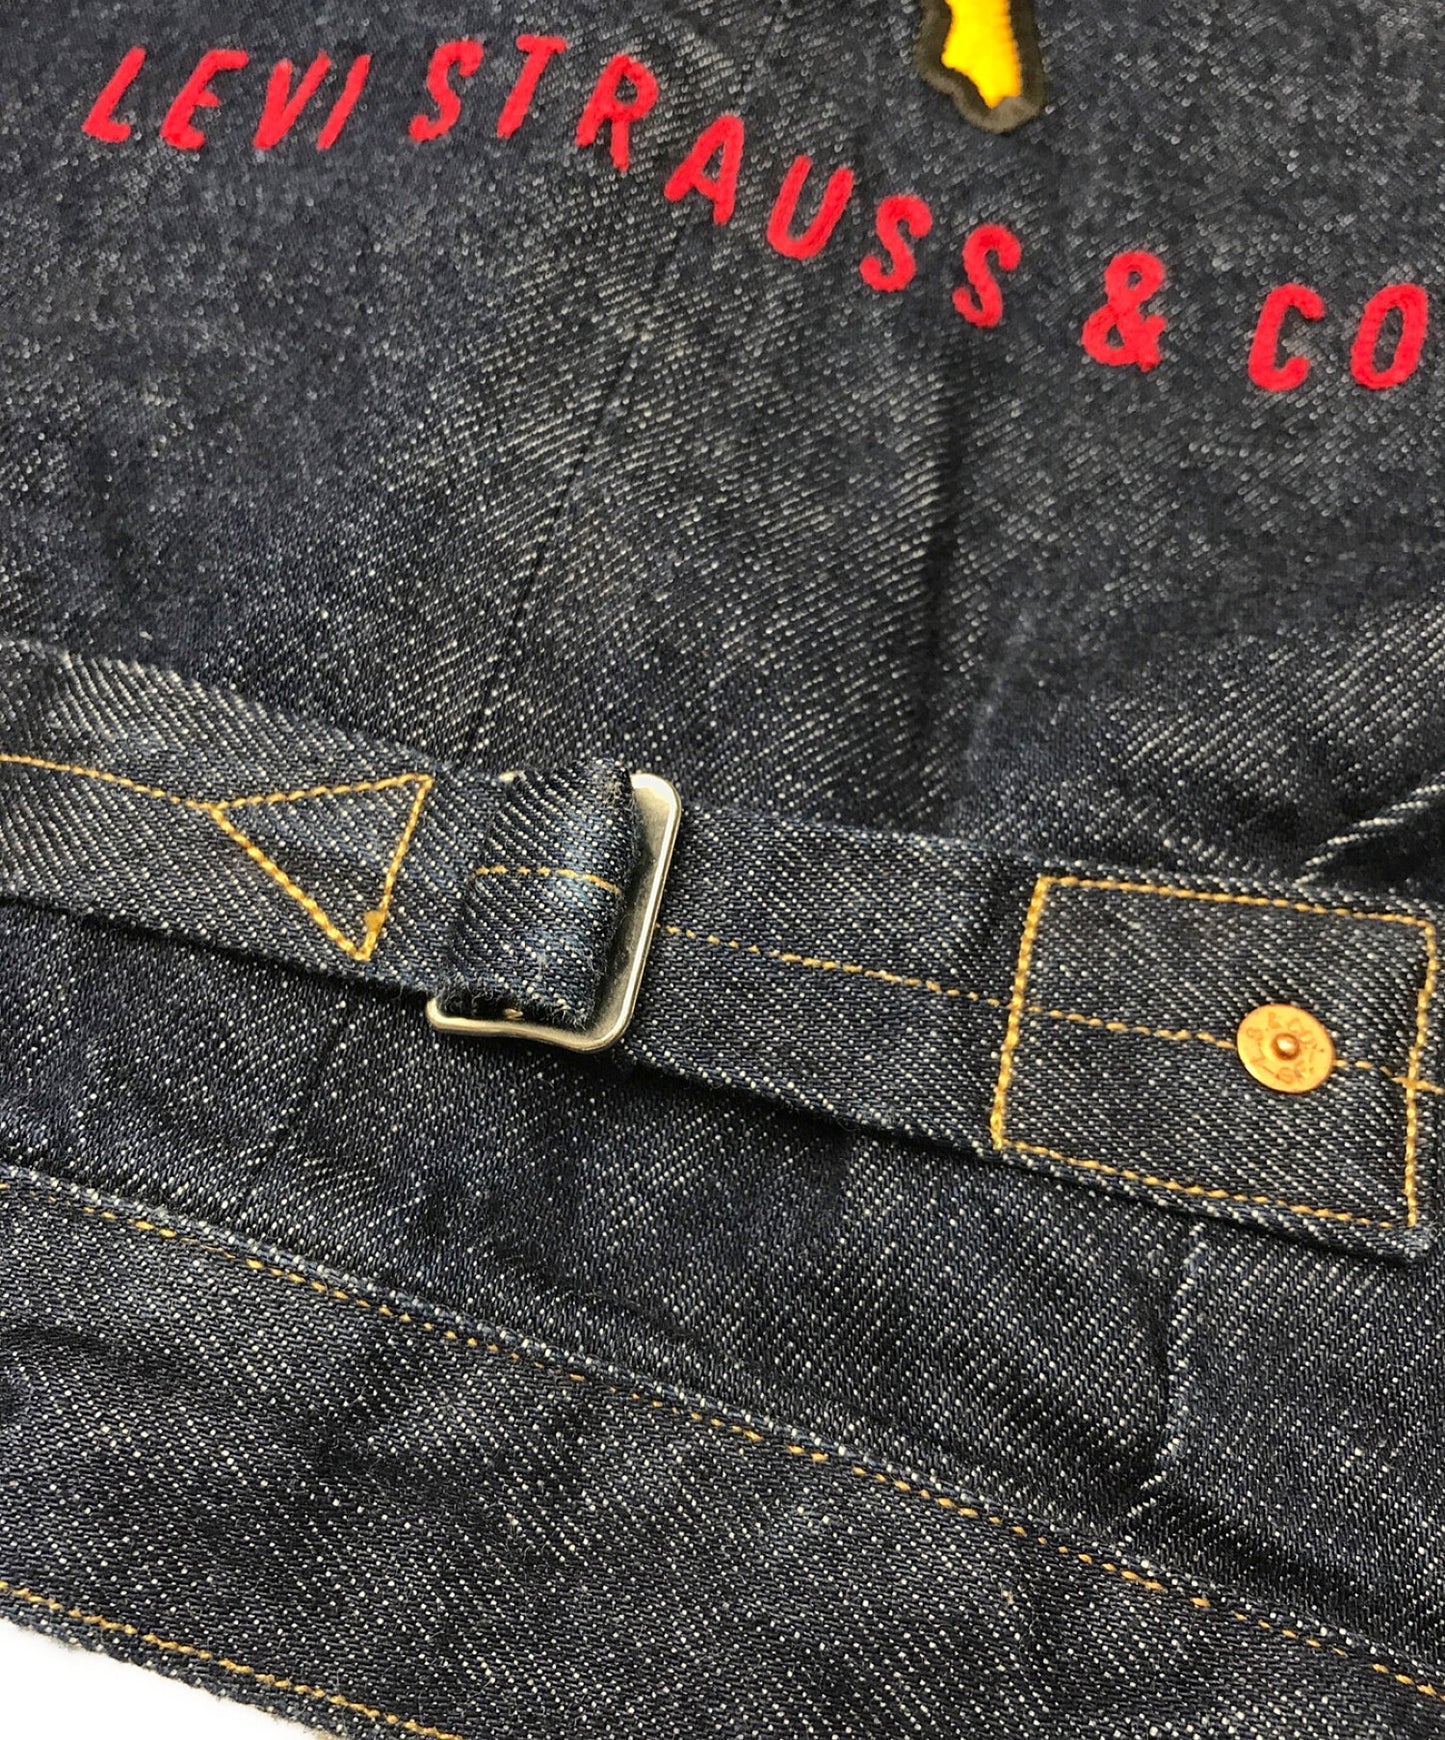 [Pre-owned] LEVI'S×HUMAN MADE 22SS 506 TRUCKER JACKET A3555-0000